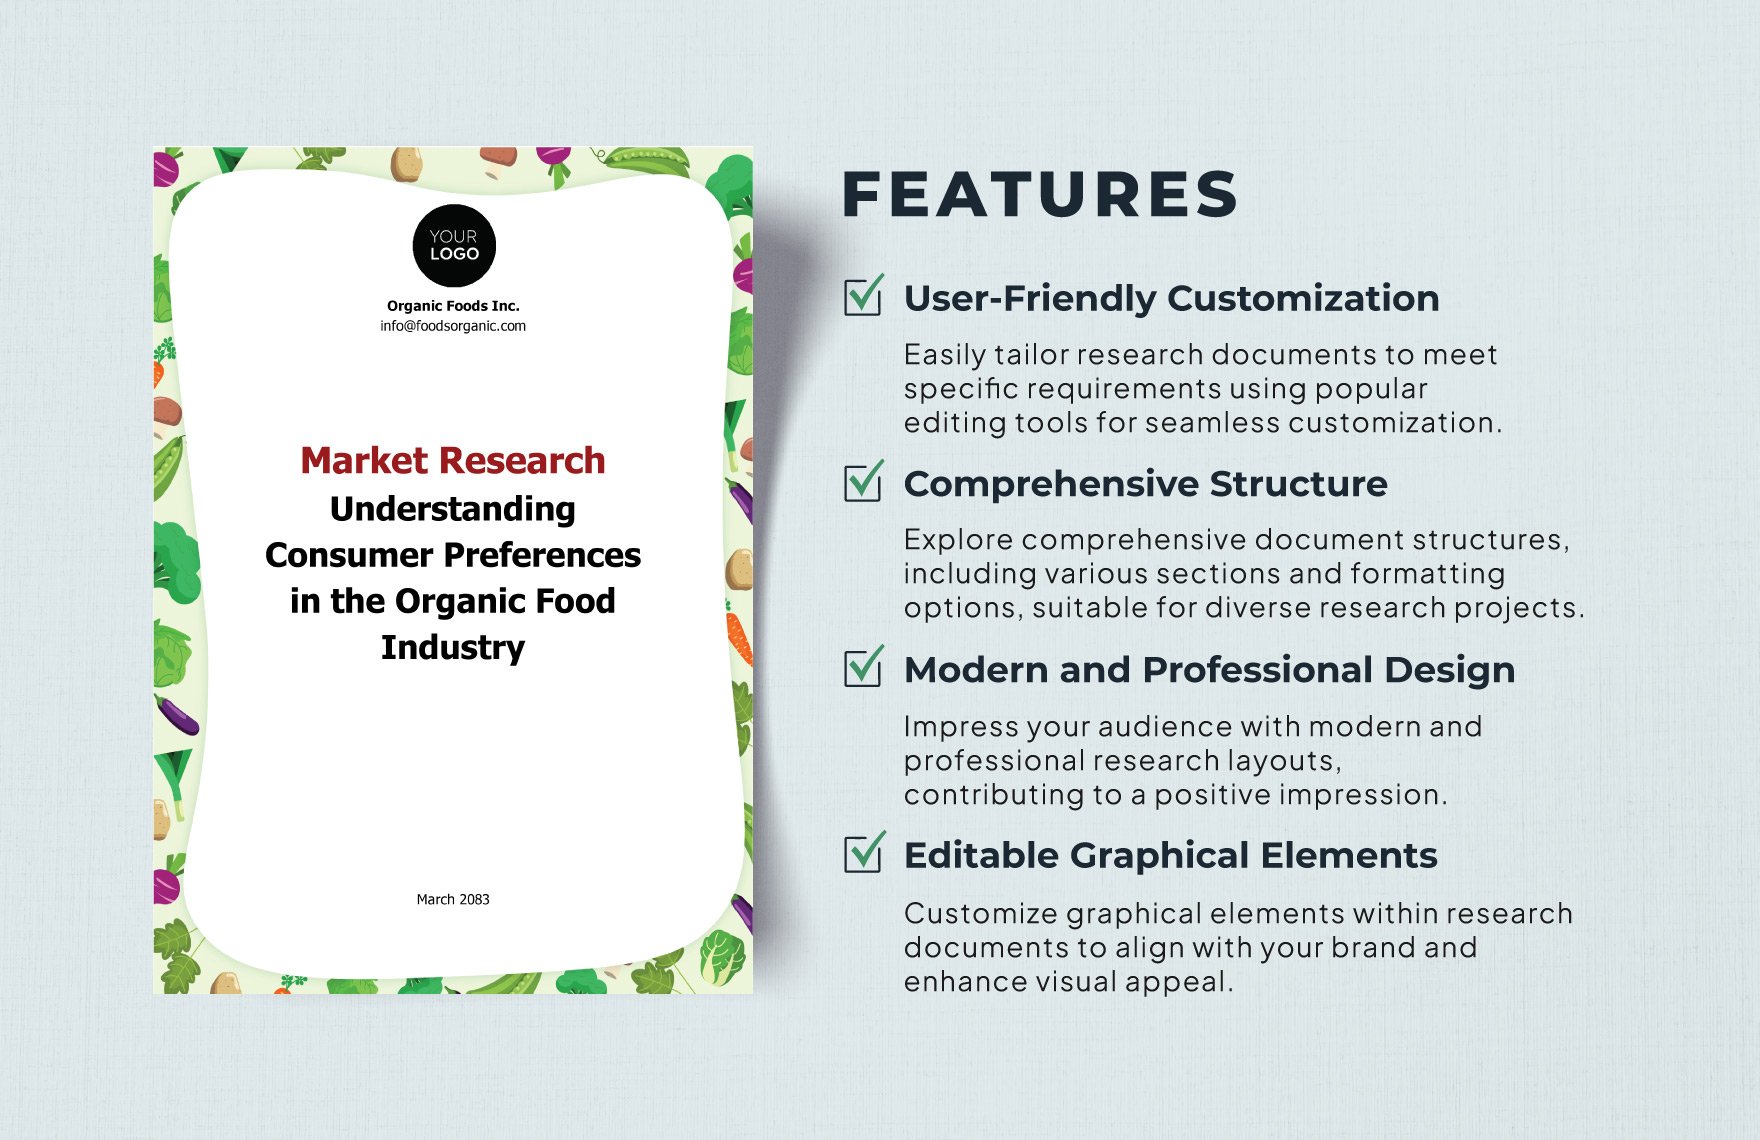 Market Research Template